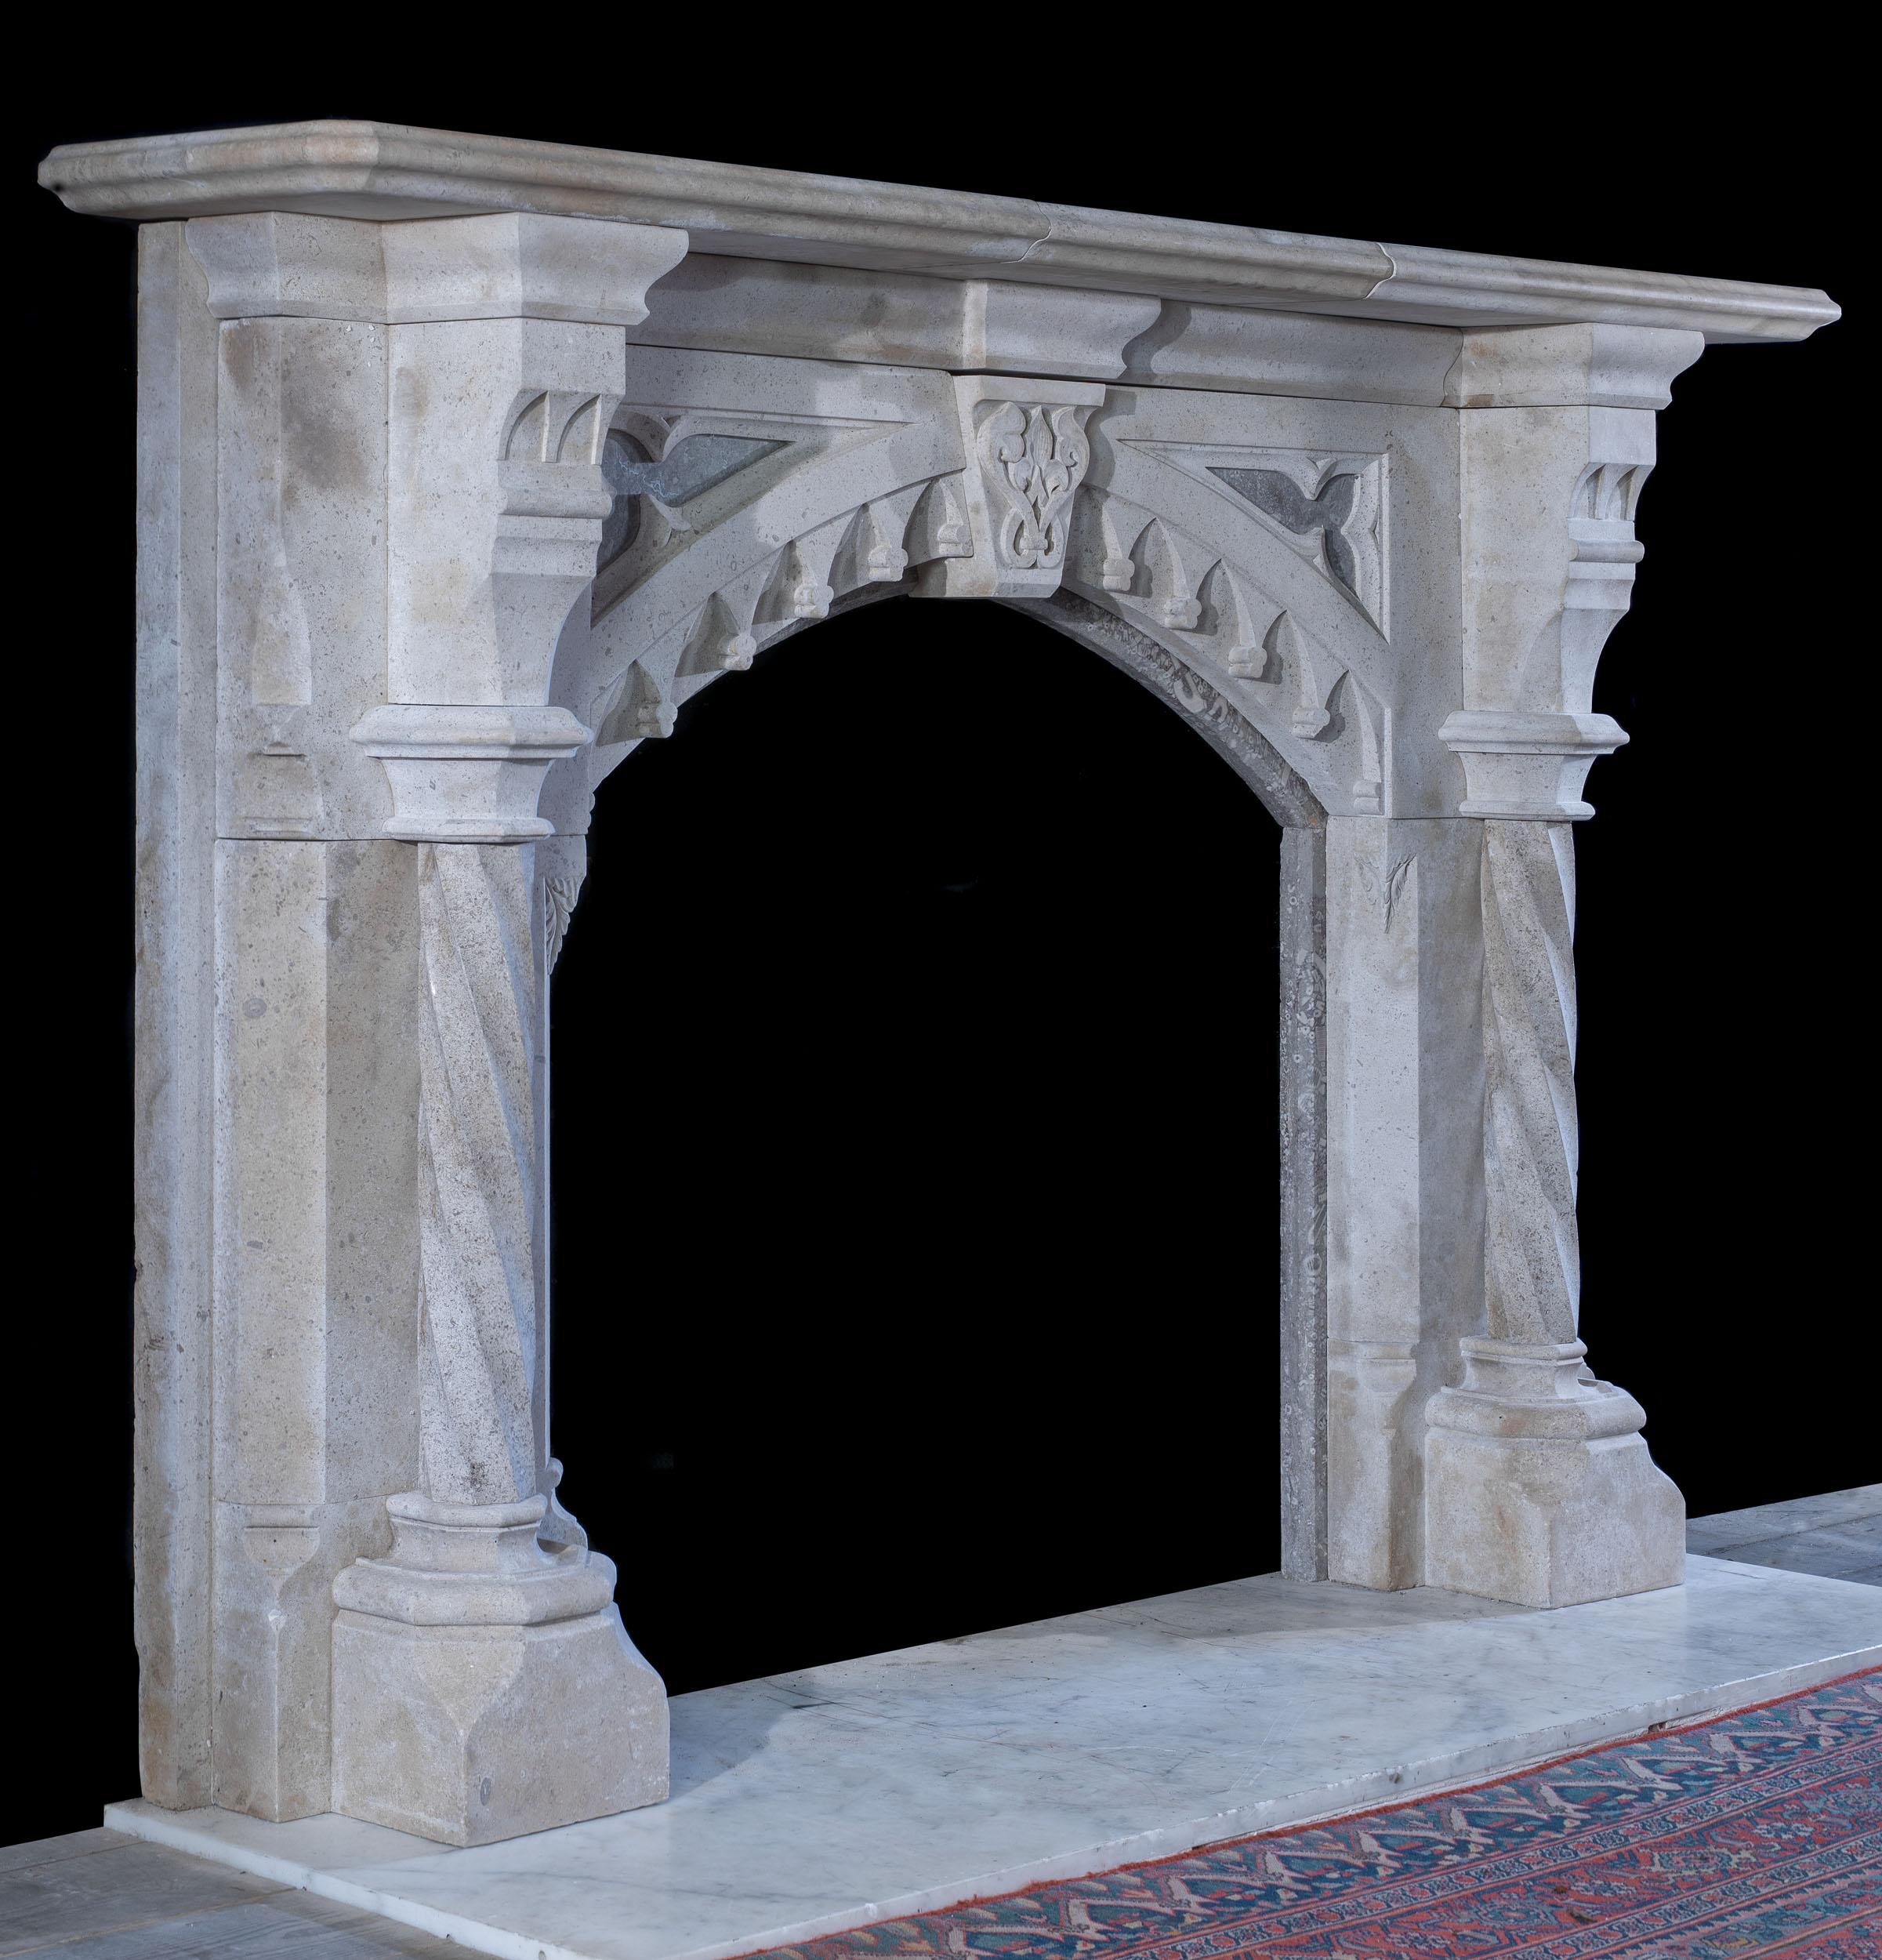 English 19th Century Stone Gothic Revival Fireplace Mantel